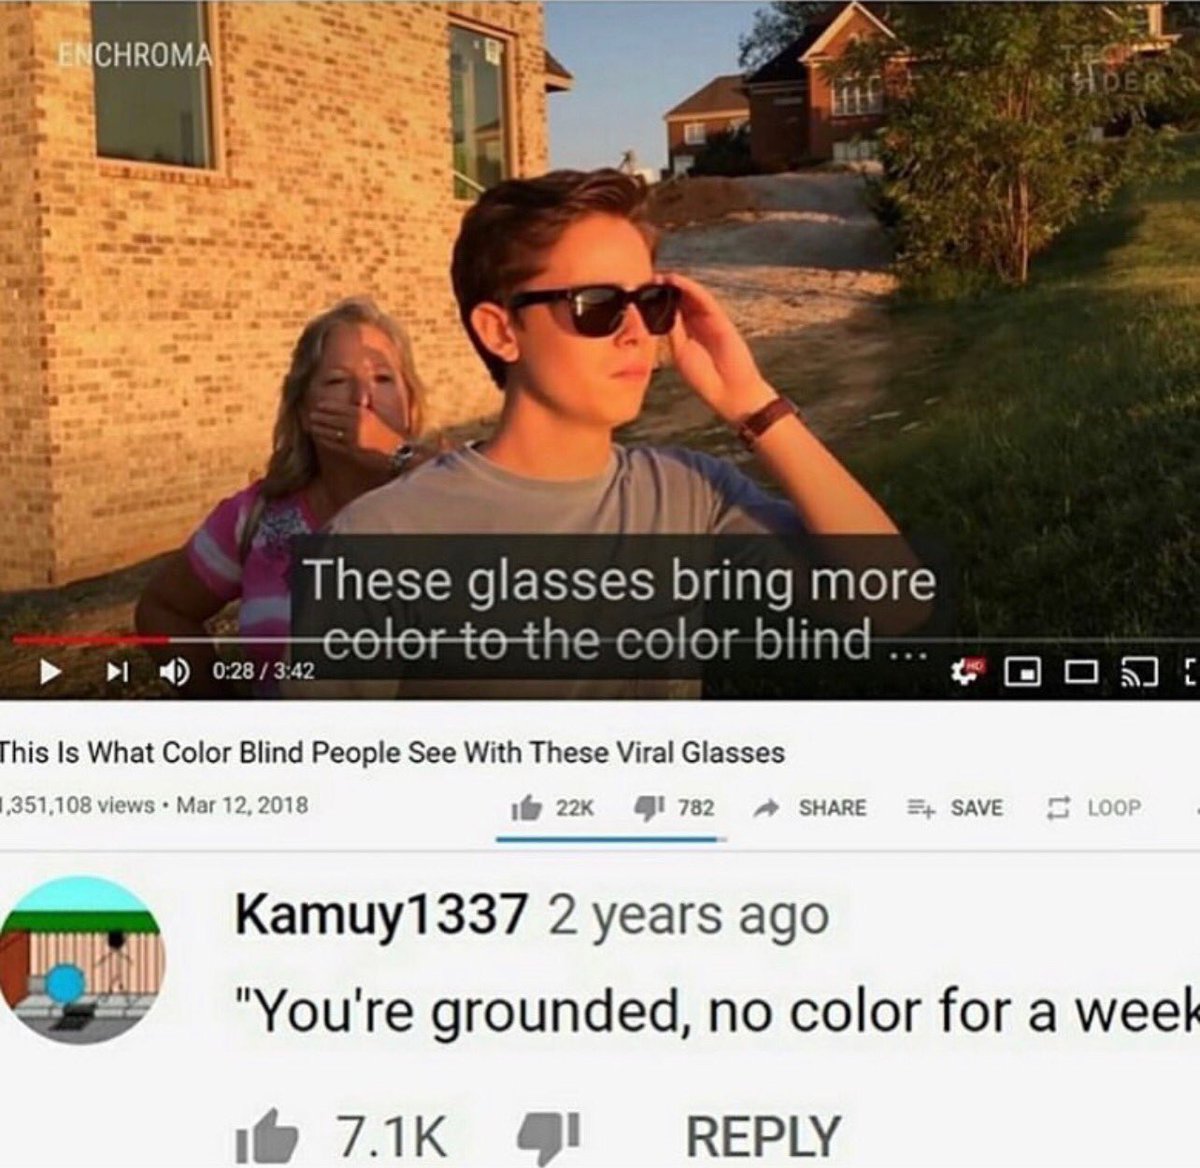 funny and savage youtube comments - sunglasses - Enchroma These glasses bring more color to the color blind ... 14 This Is What Color Blind People See With These Viral Glasses ,351,108 views 4782 . Save Der 5 Loop Kamuy1337 2 years ago